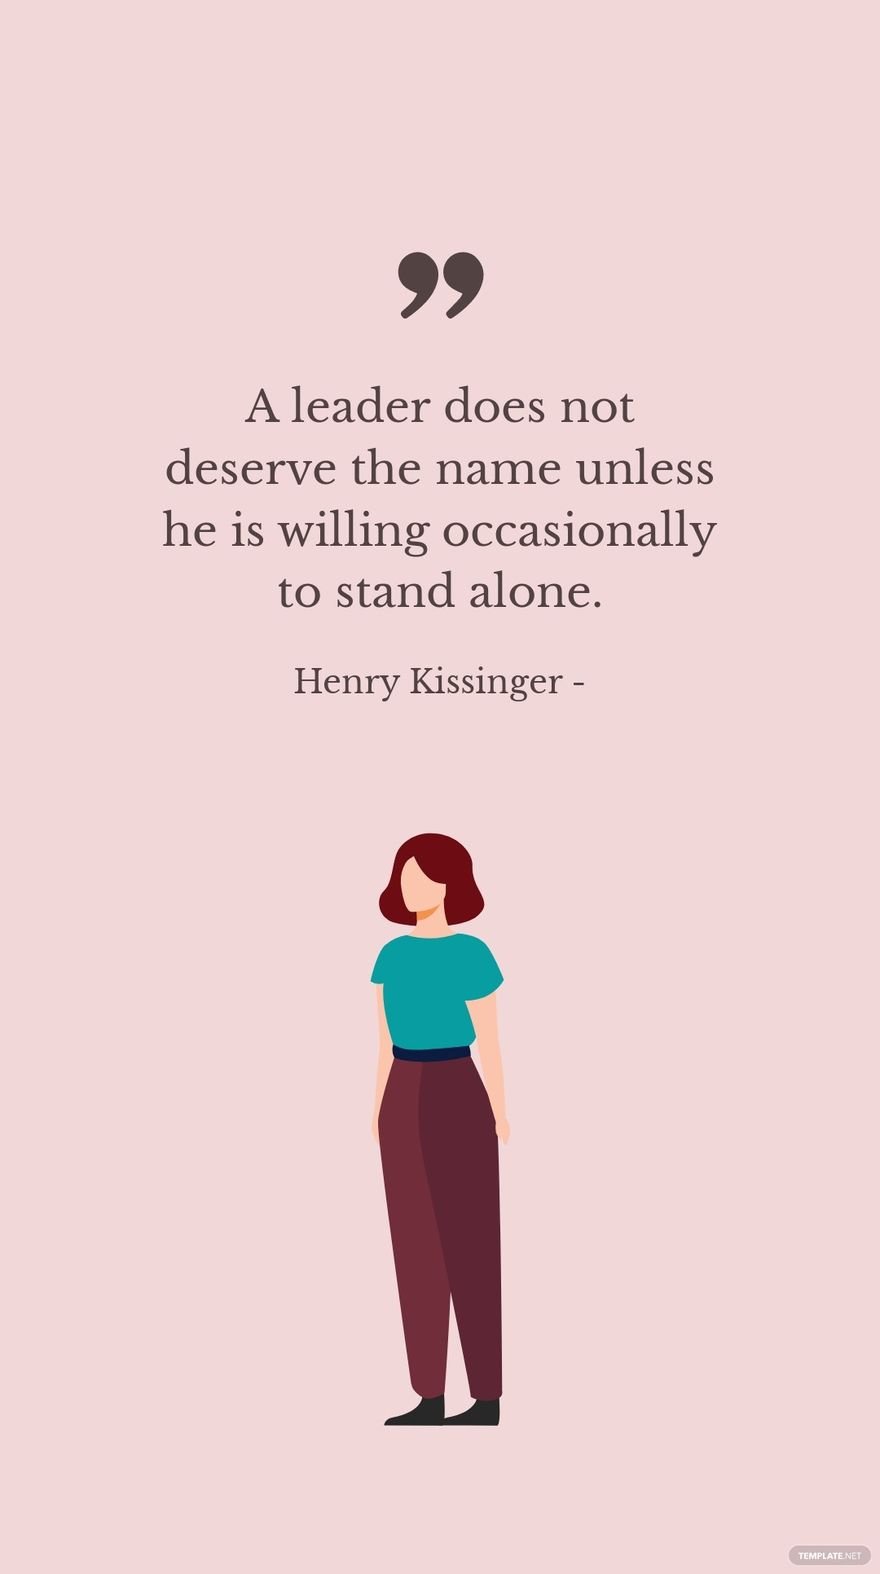 Henry Kissinger - A leader does not deserve the name unless he is willing occasionally to stand alone.